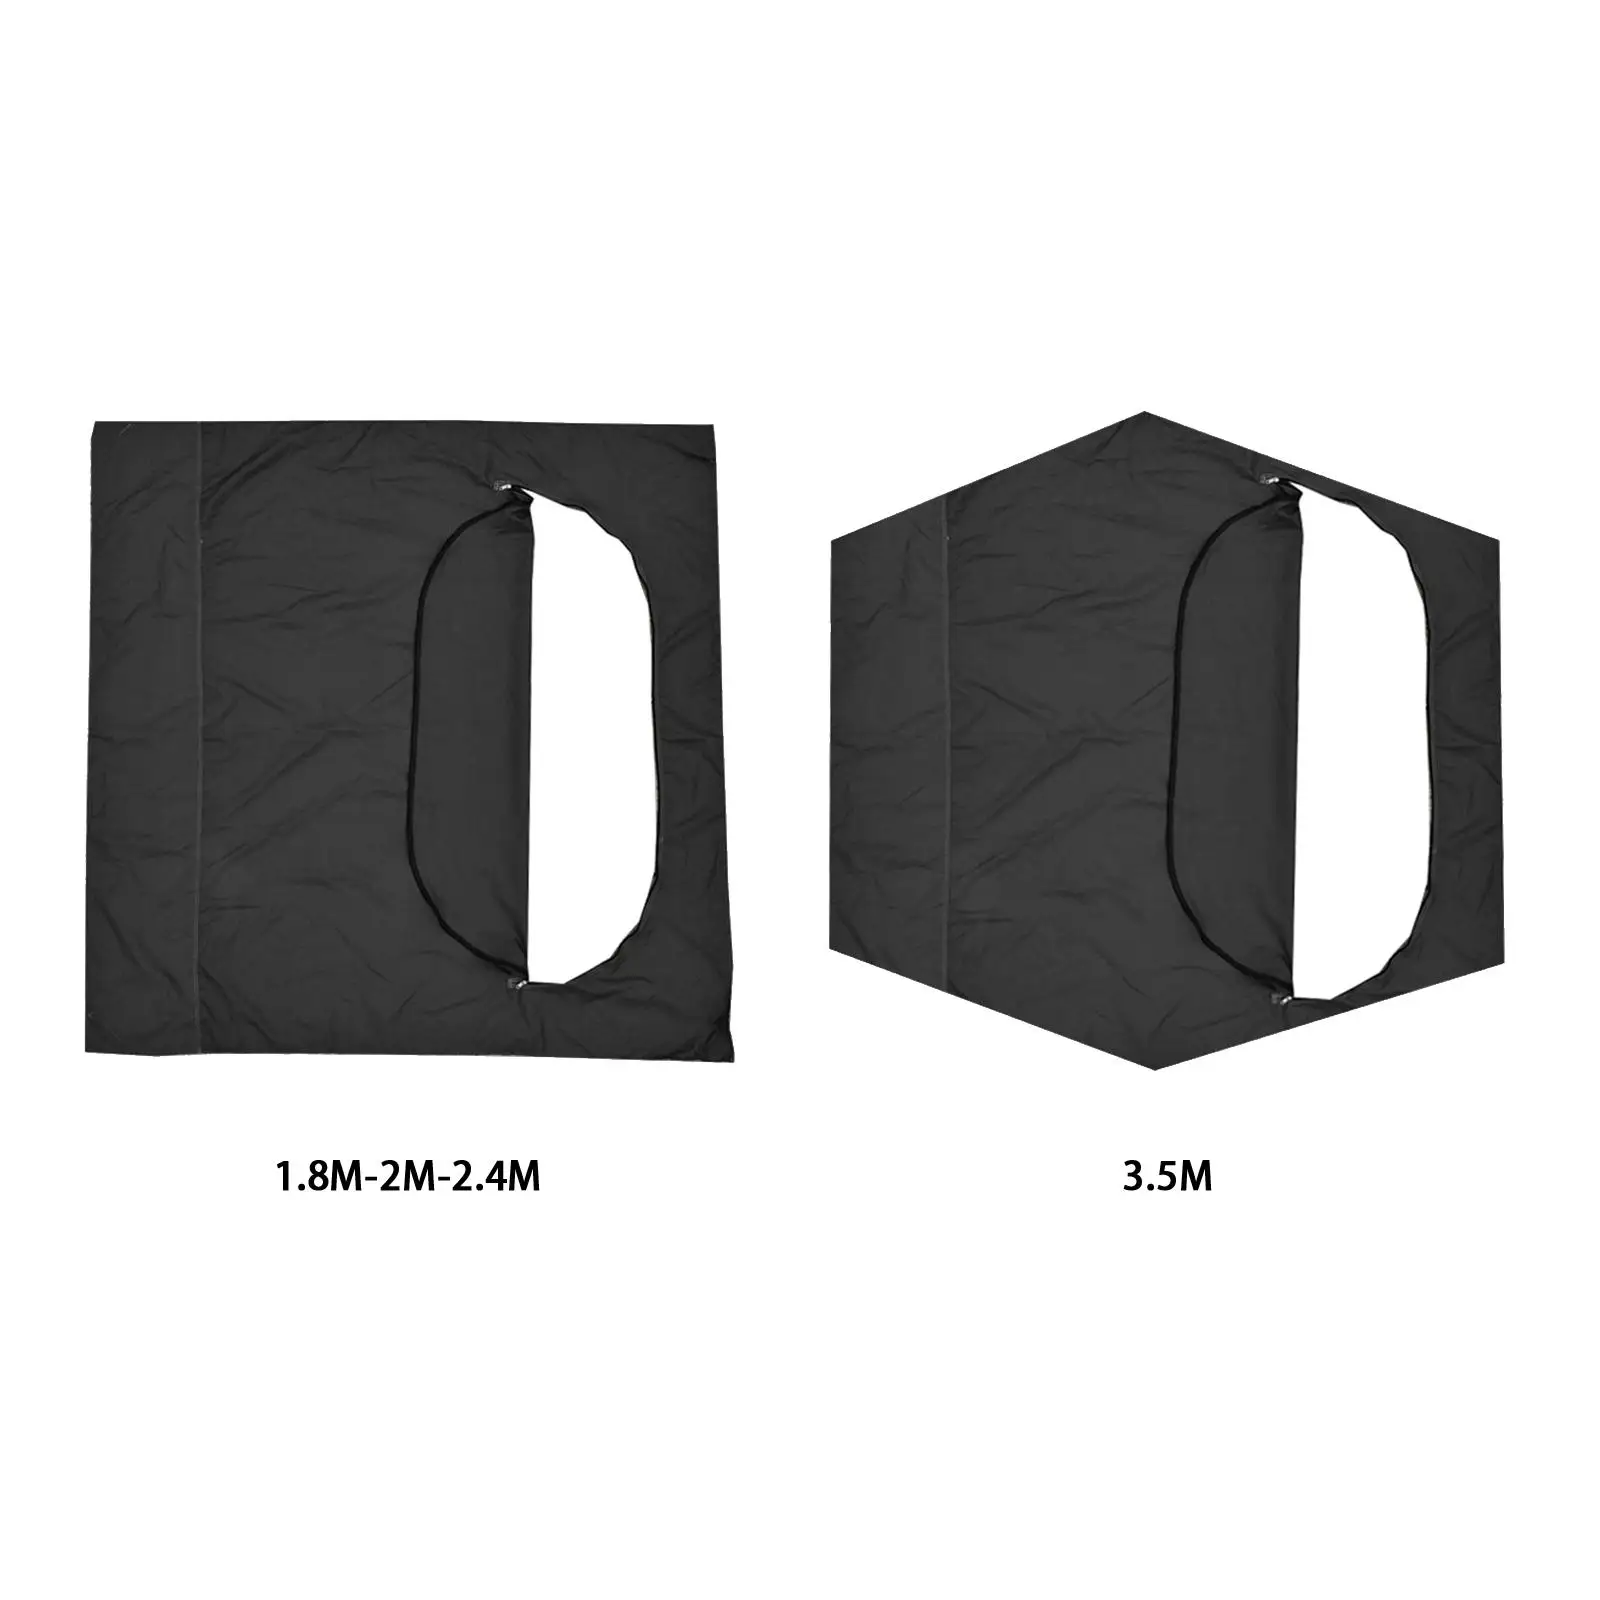 Lightweight Detachable Waterproof Camping Cover The Rain, Large Footprint Compact Tent Cloth for Or